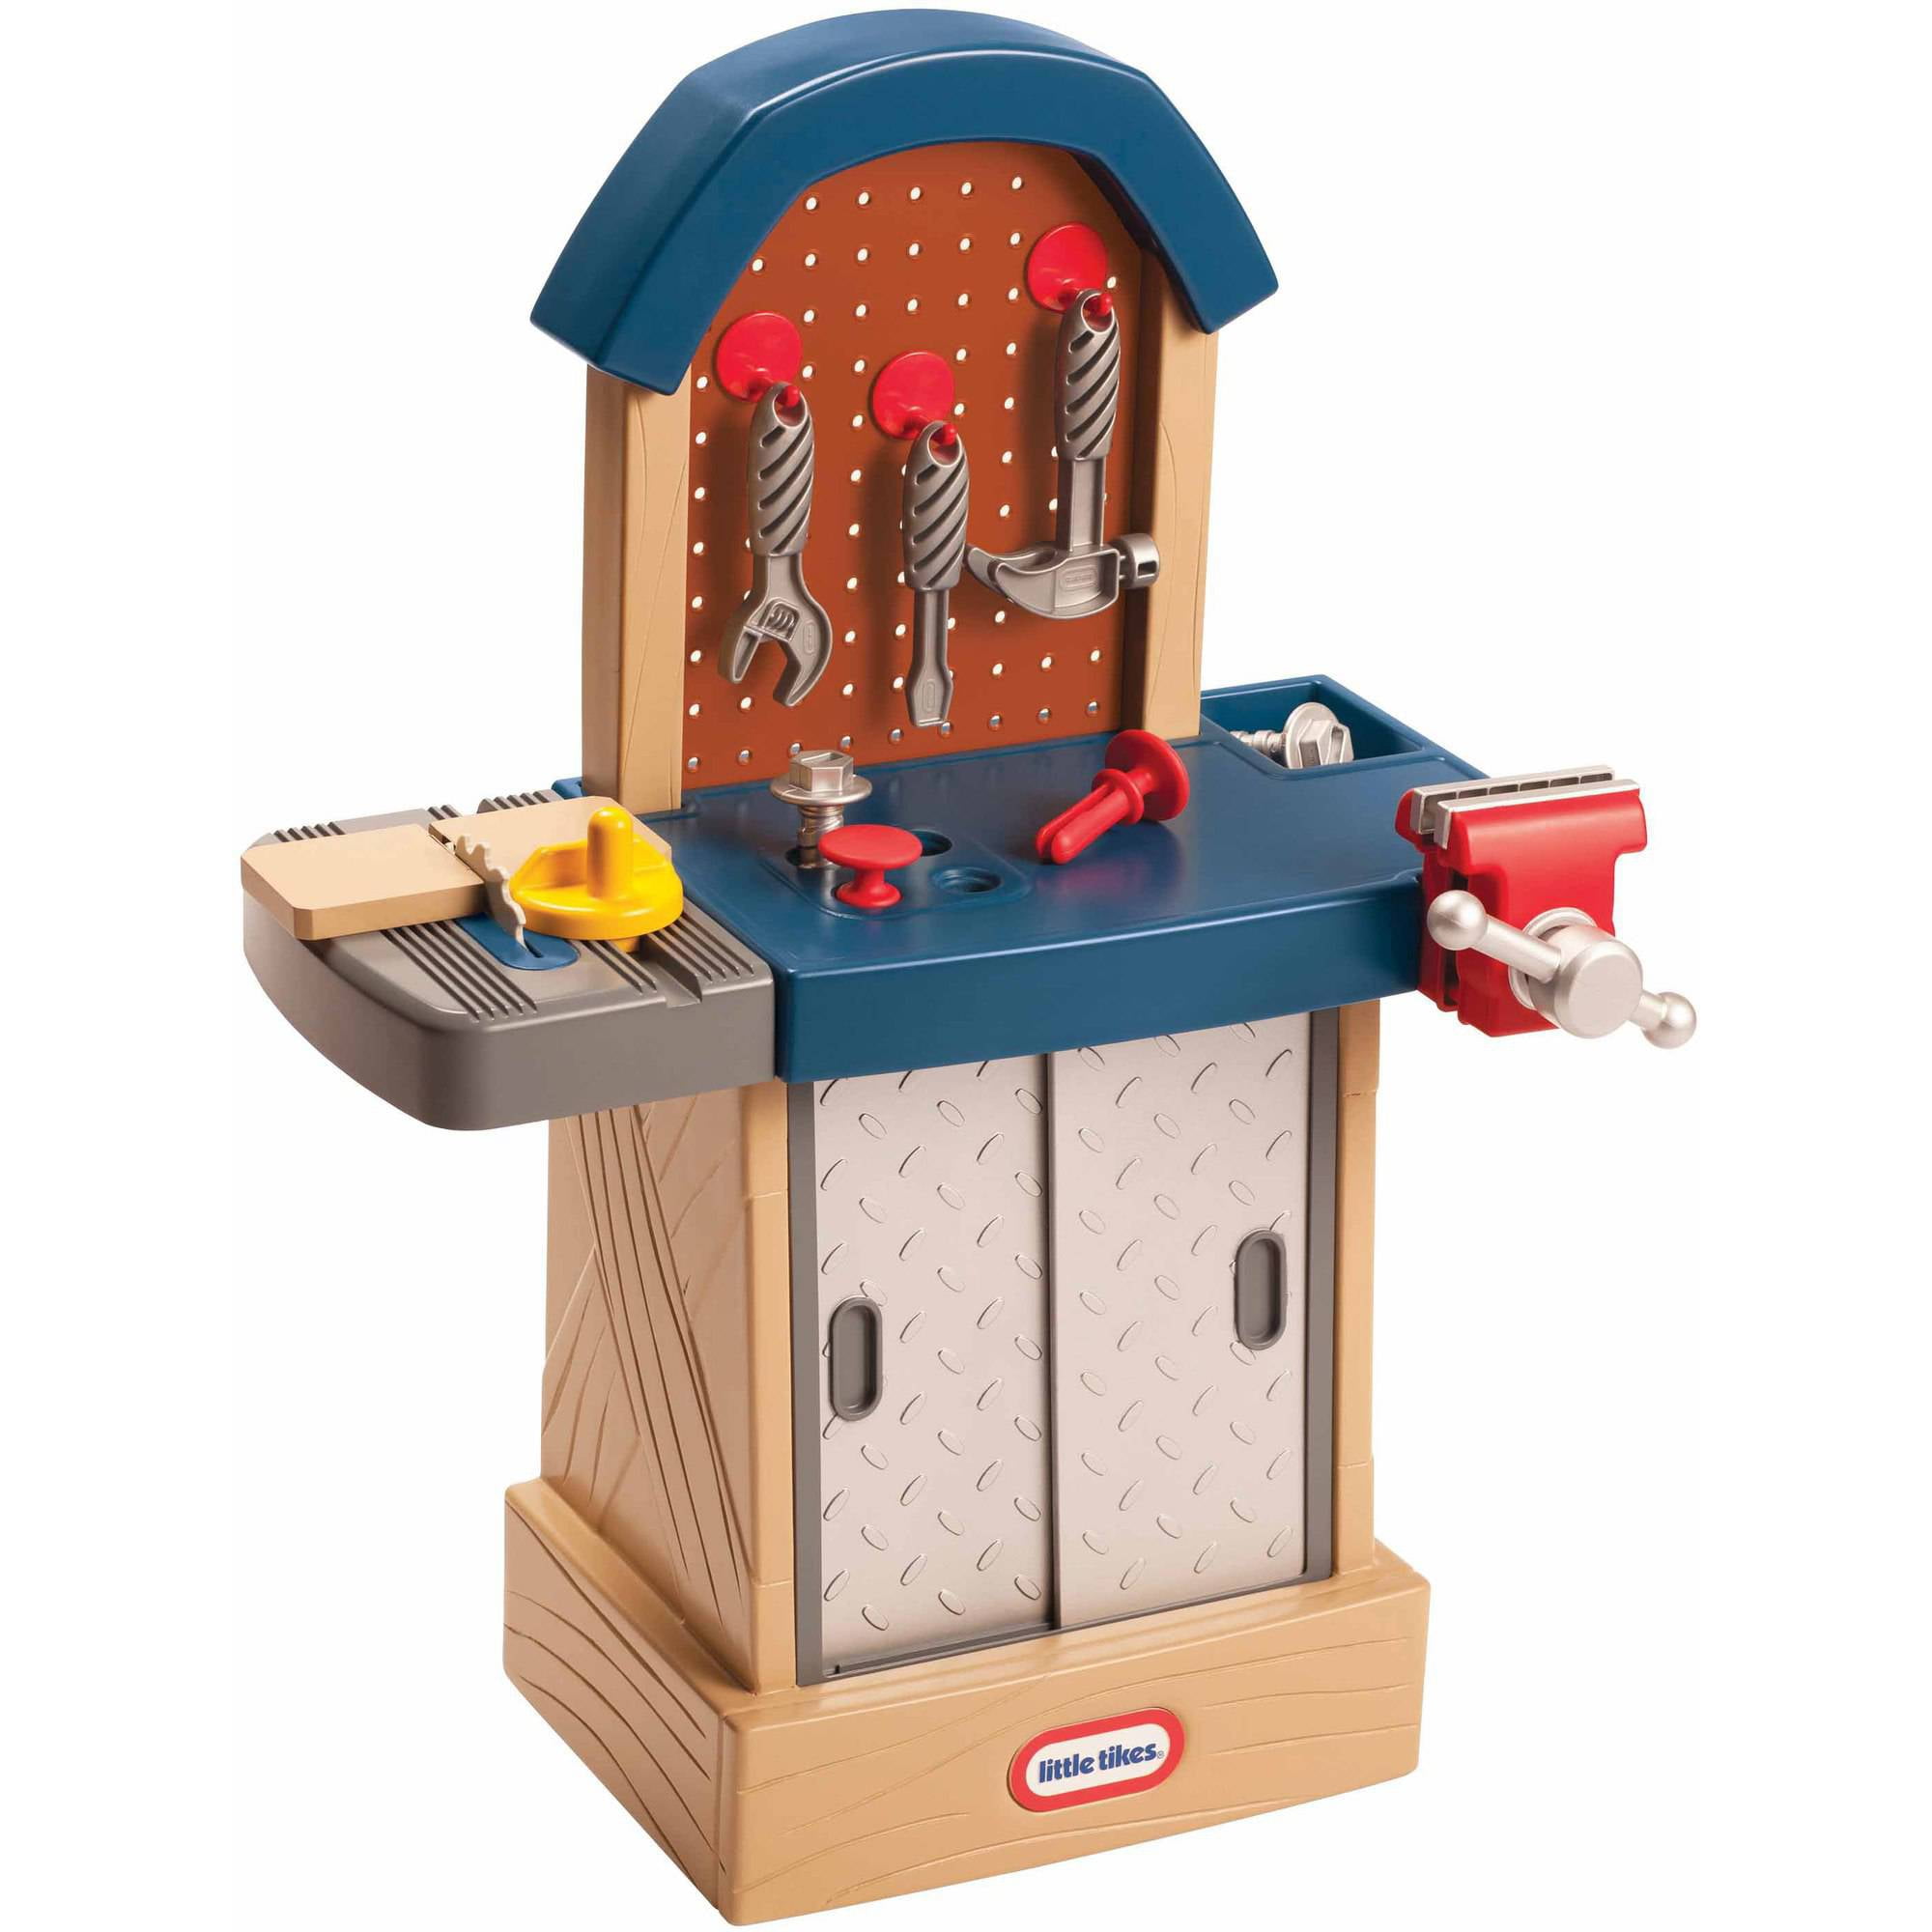 Wooden Play Tool Workbench Set for Kids Toddlers Construction Tool Playset Toys 